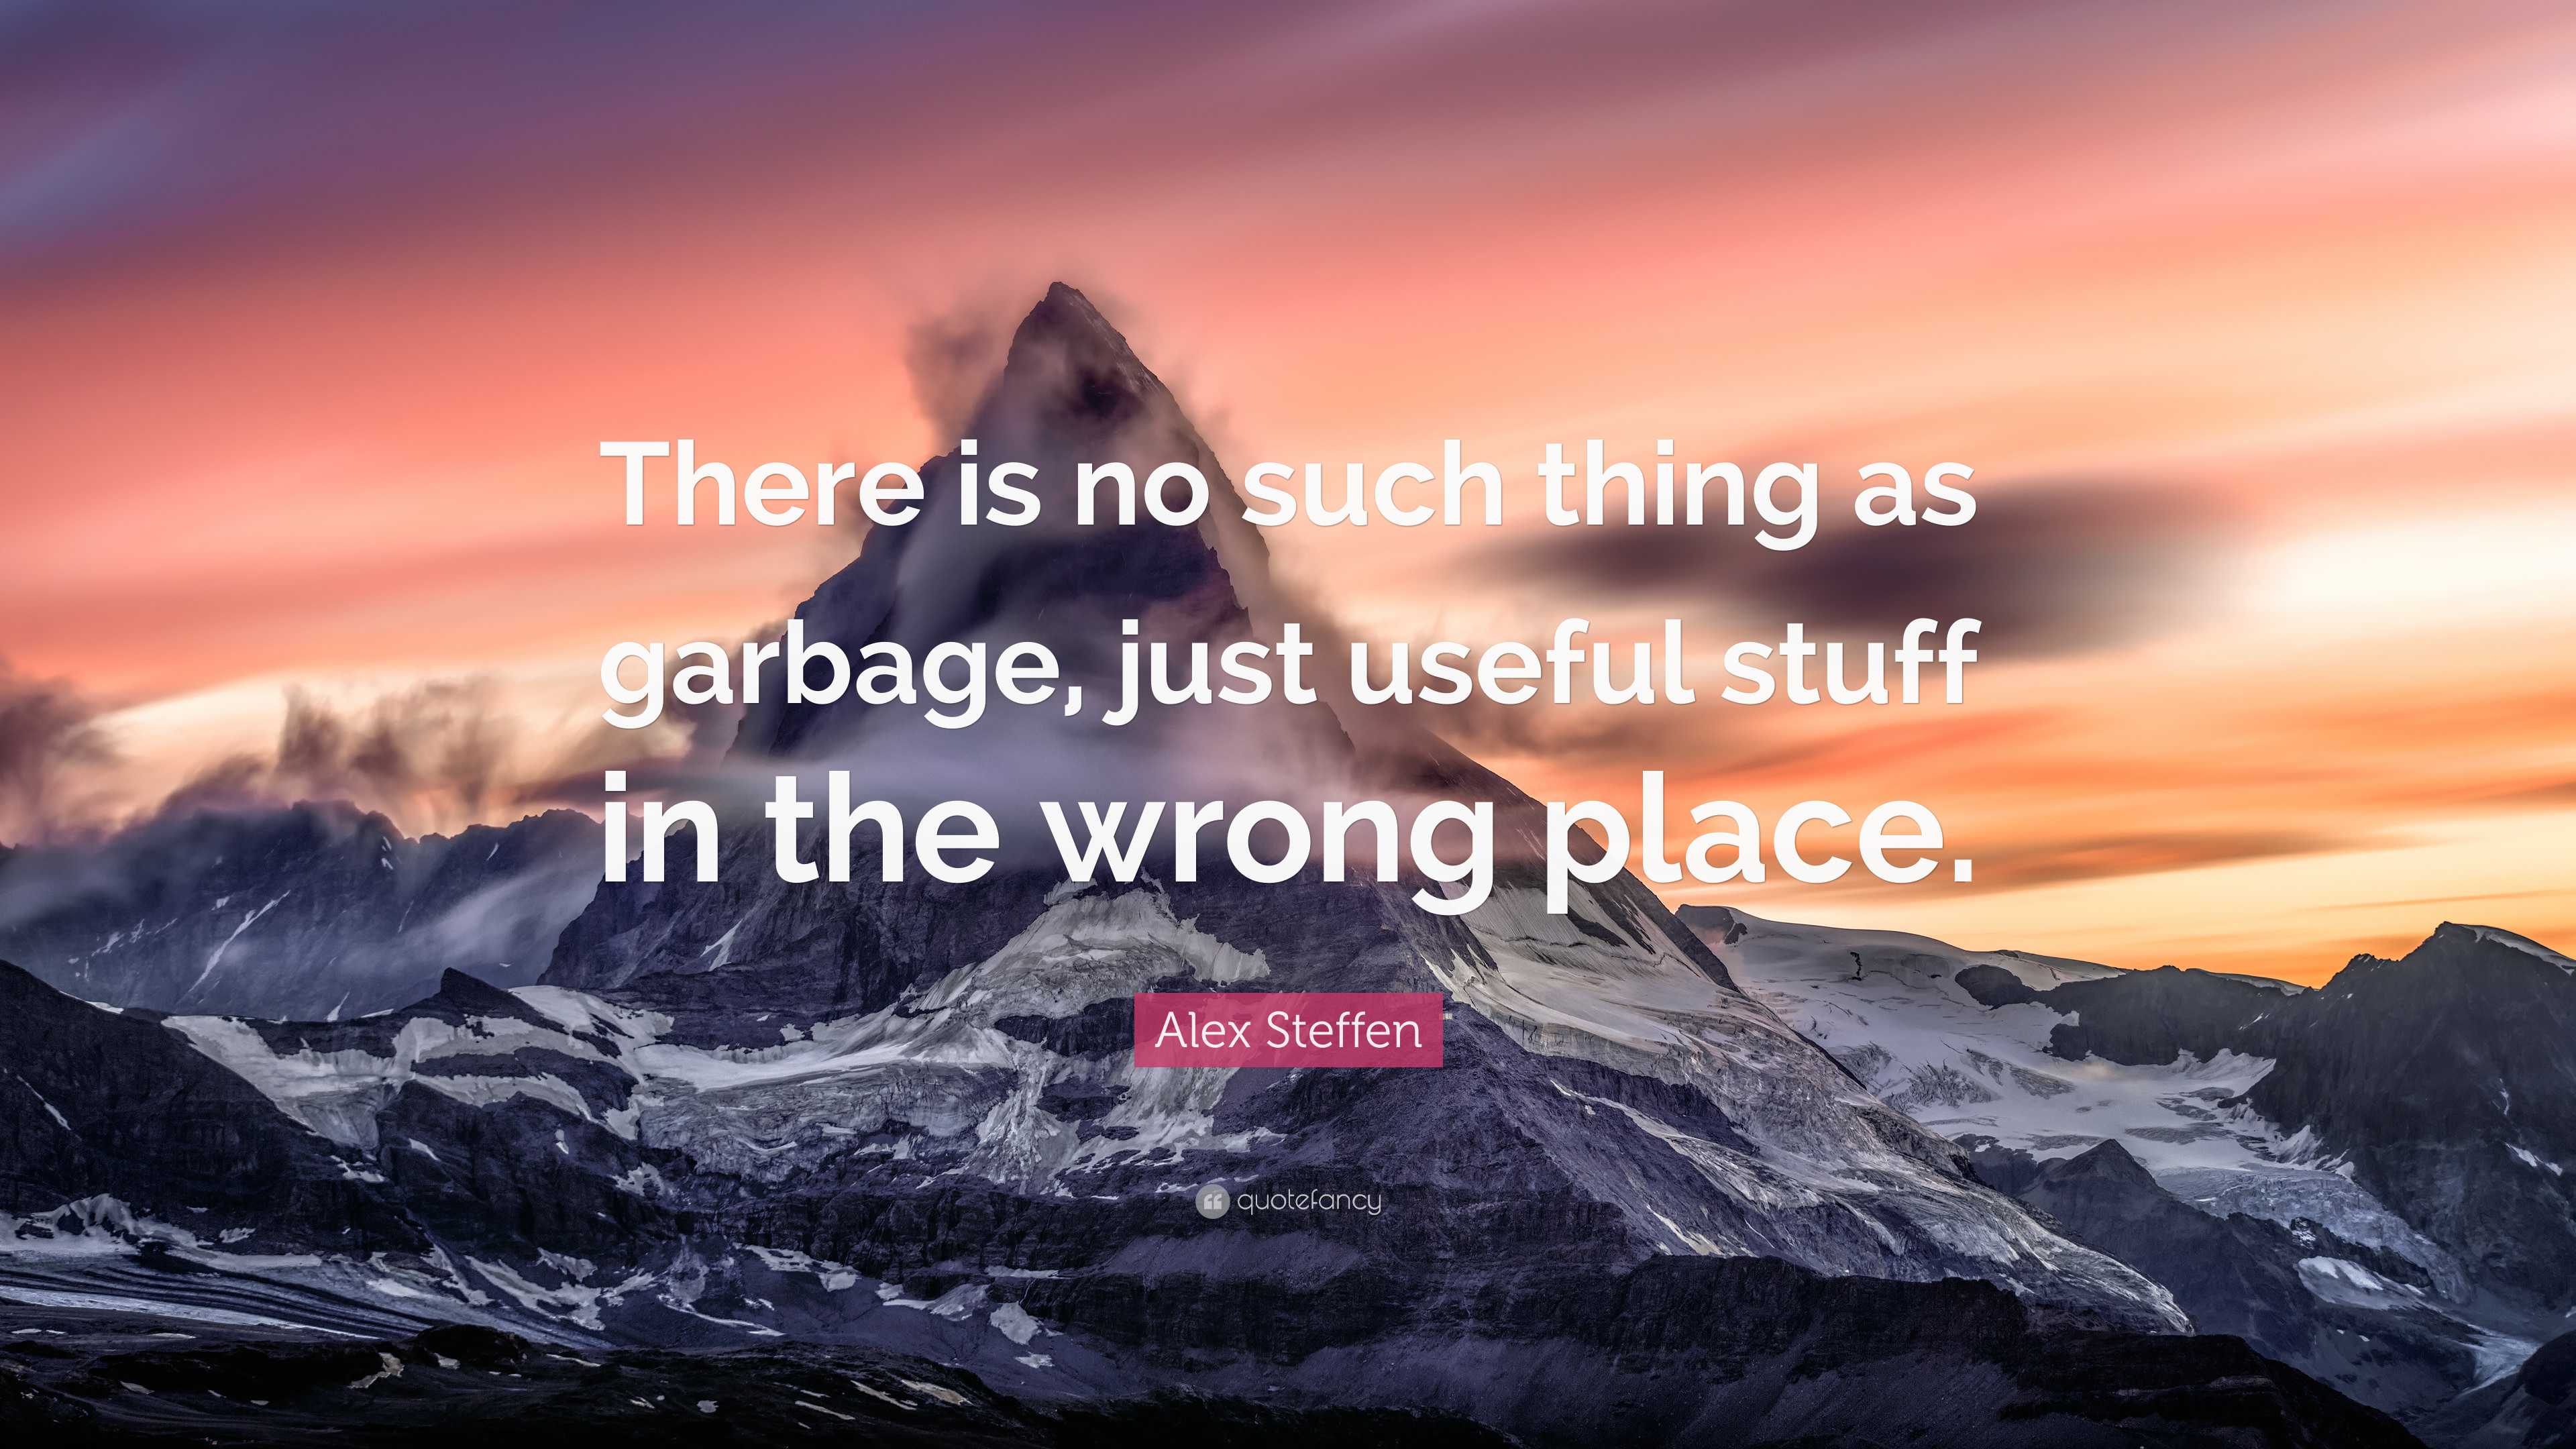 https://quotefancy.com/media/wallpaper/3840x2160/8030520-Alex-Steffen-Quote-There-is-no-such-thing-as-garbage-just-useful.jpg